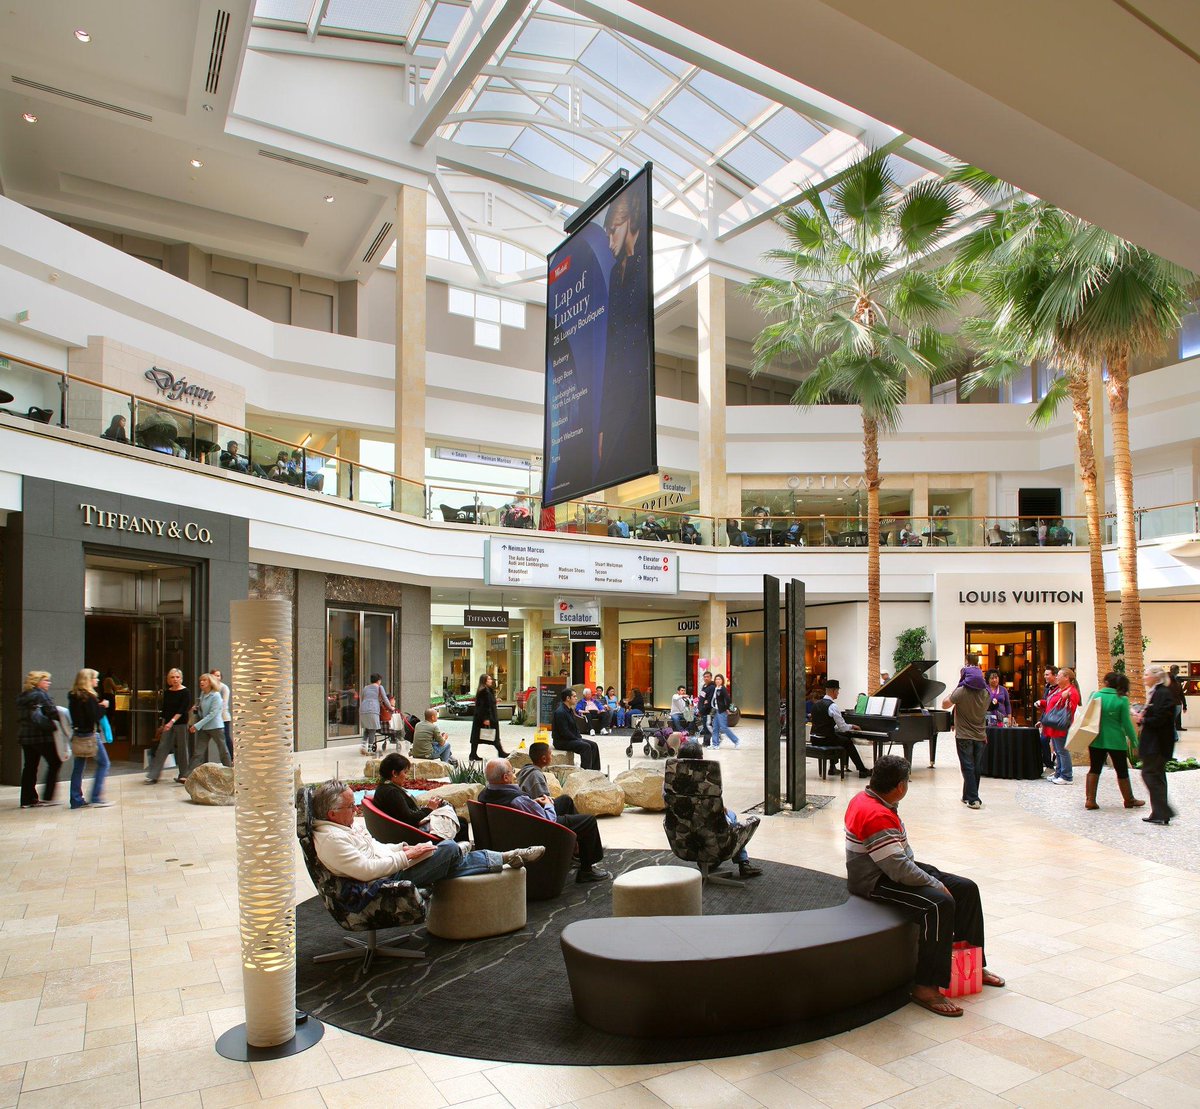 If you went to any Westfield Mall in Jan 2020, you'd walk through a section that has LV, Prada, Gucci, Tory Burch, Swarovski, Michael Kors, Kate Spade and more. They're all right next to each other because they all occupy their own niche of "achievement" or "status" purchases.